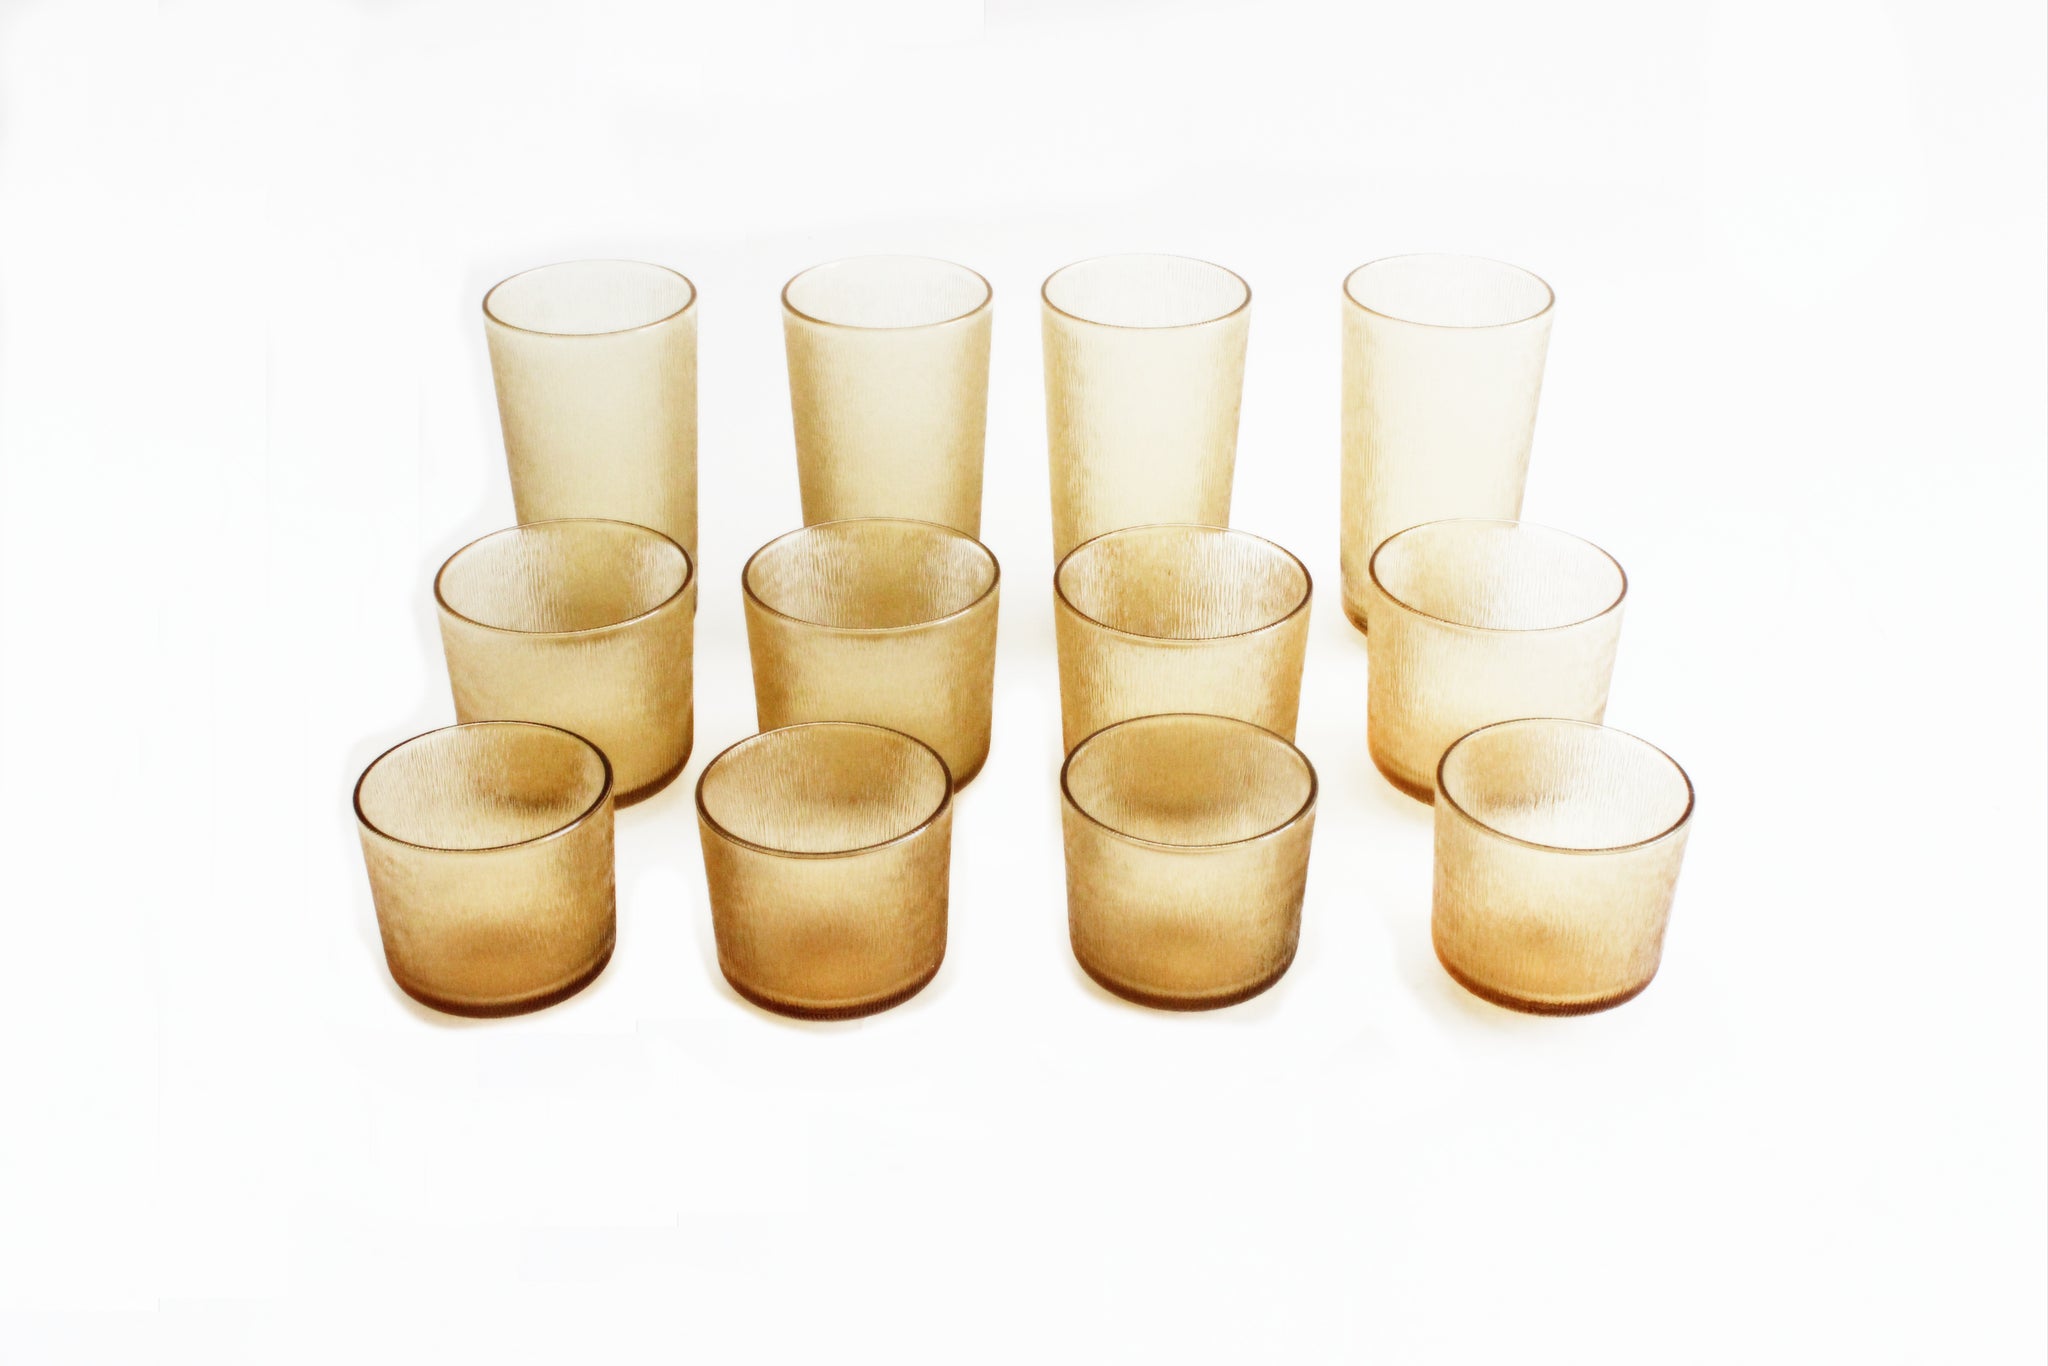 Drinking glasses & Tumblers - Shop at